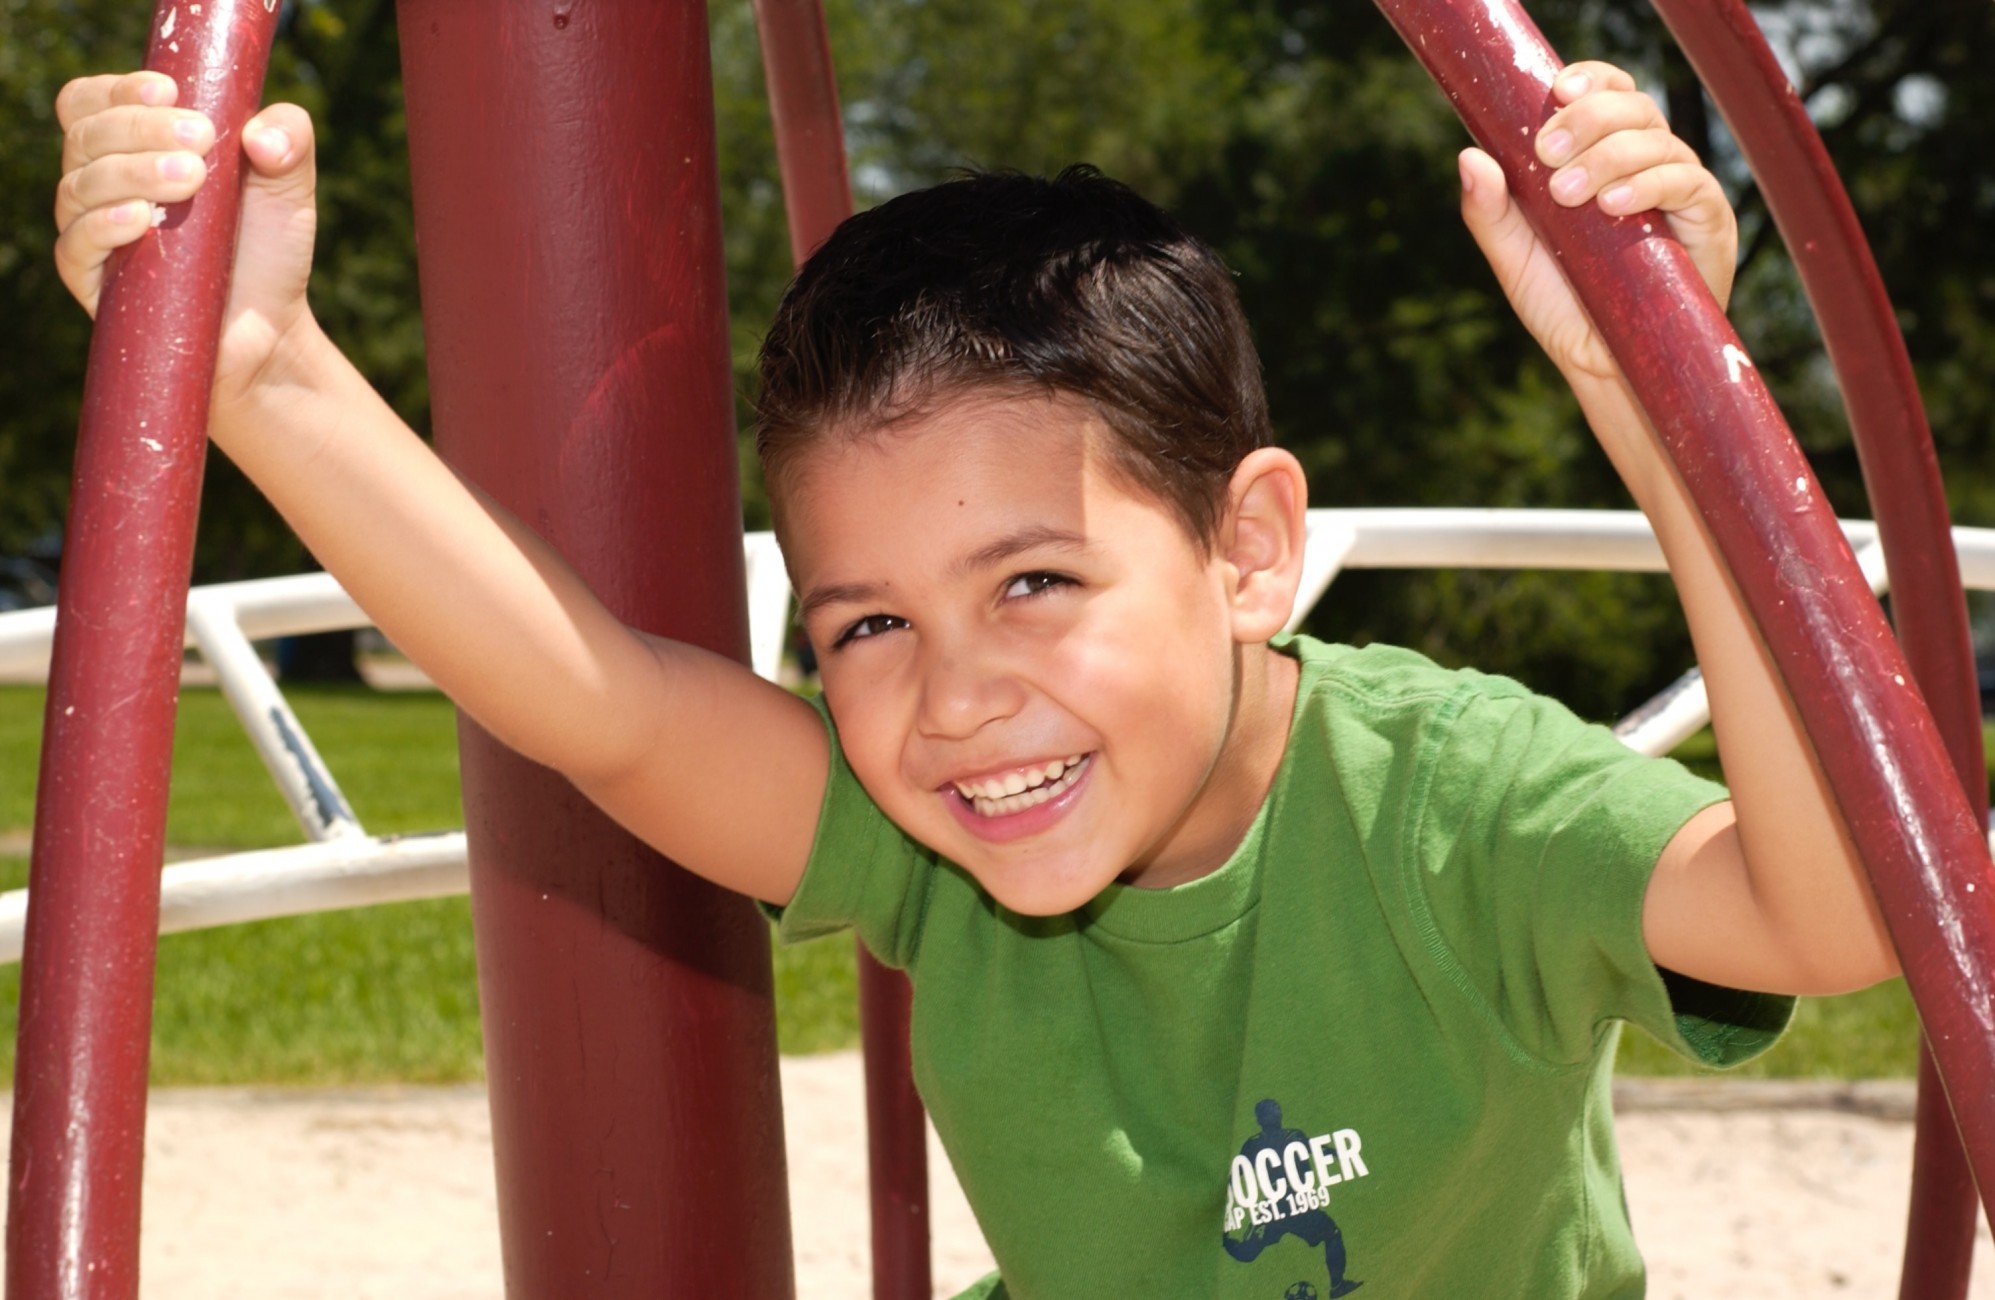 Featured image of Young boy with black hair smiling at playground in green shirt